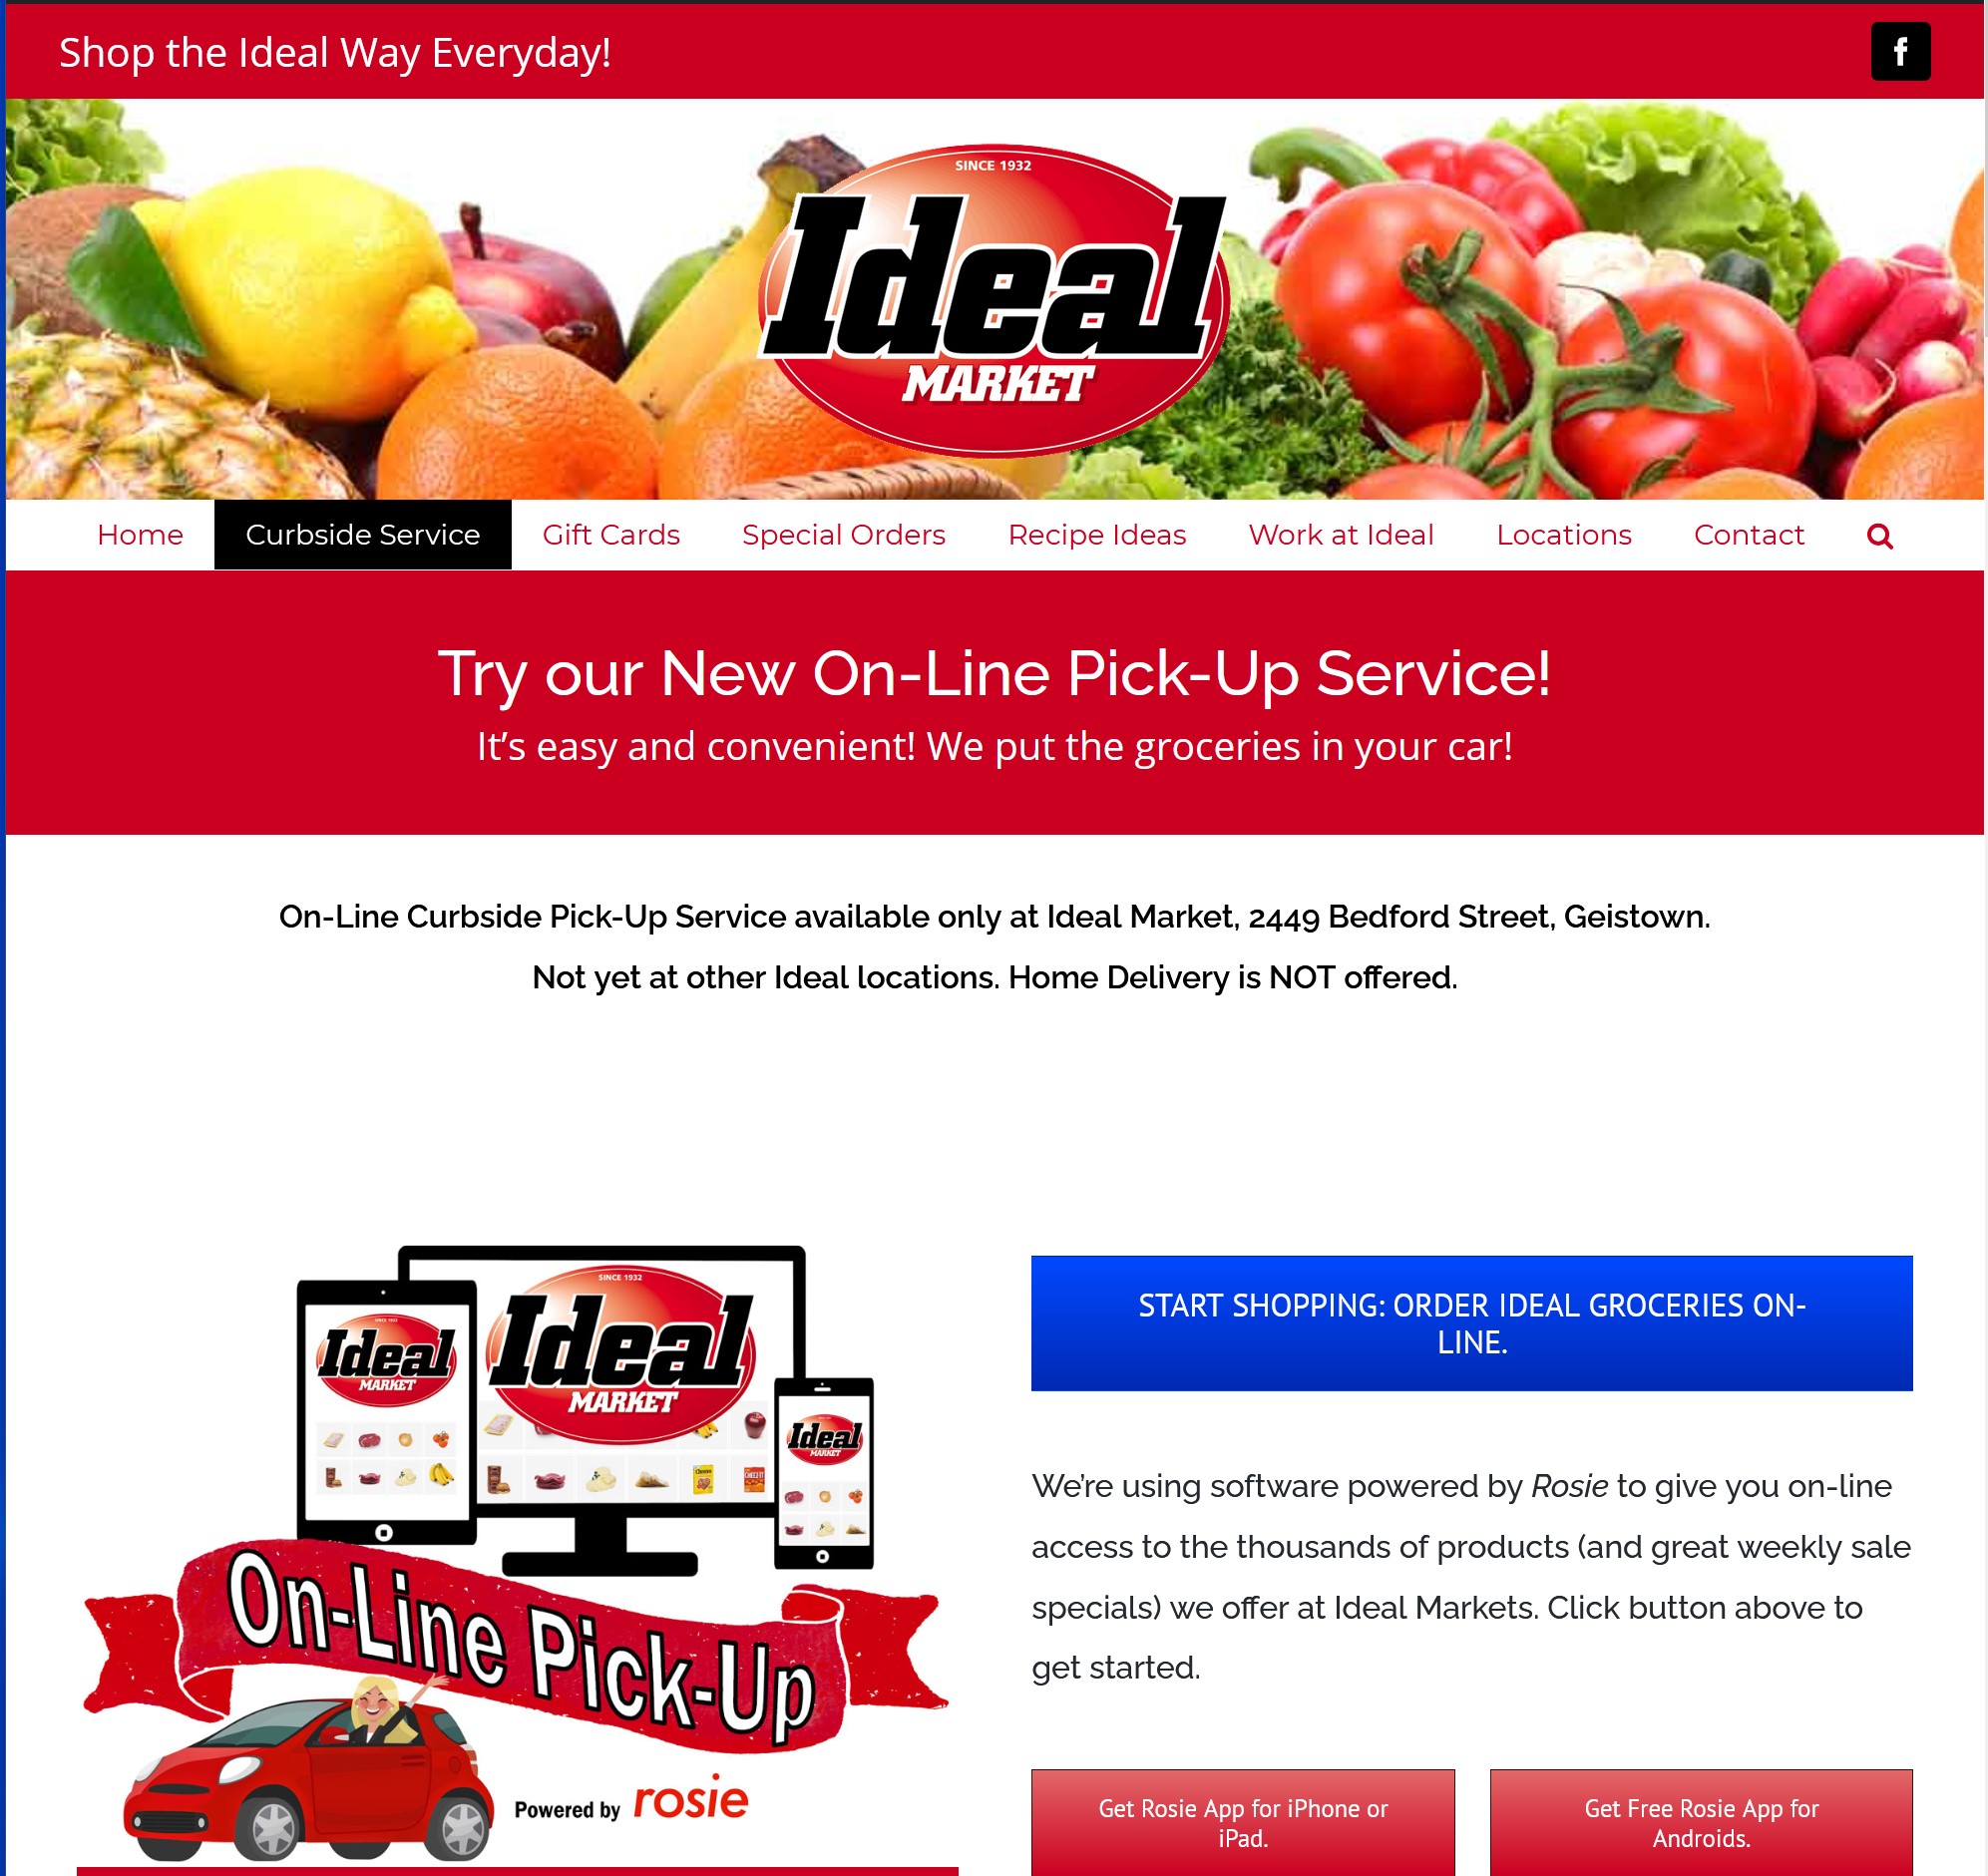 Ideal Markets in Johnstown, Vinco, Seward and Homer City, PA